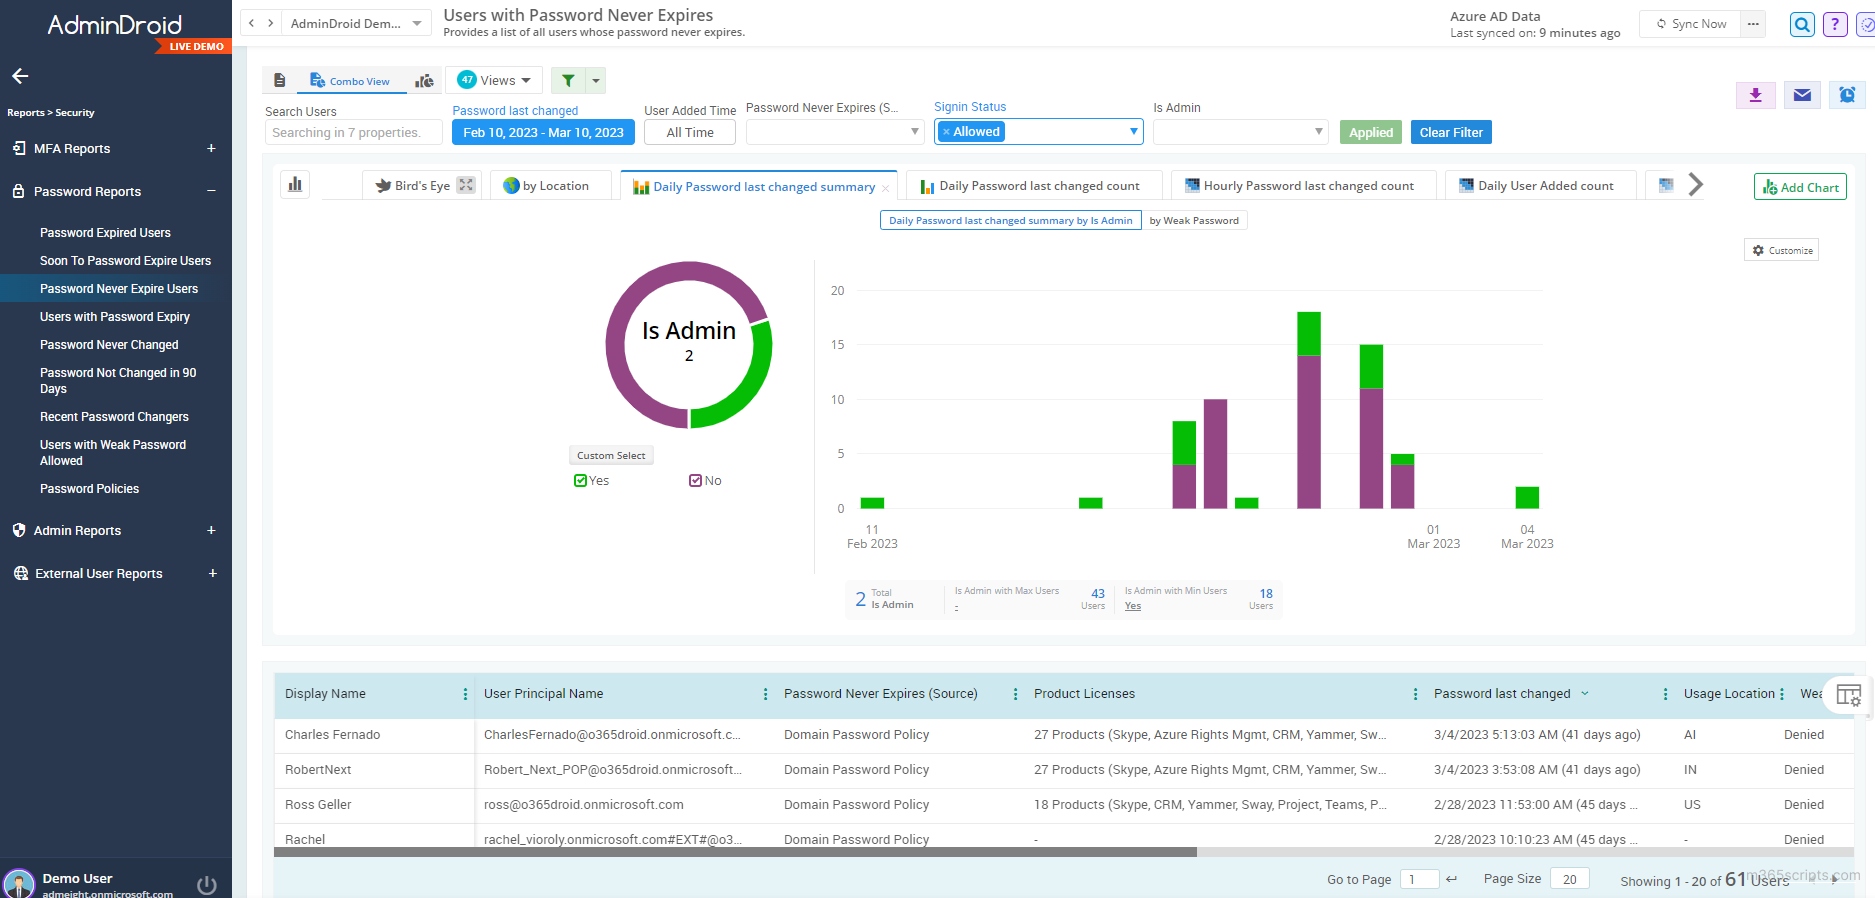 Microsoft 365 reporting tool by AdminDroid